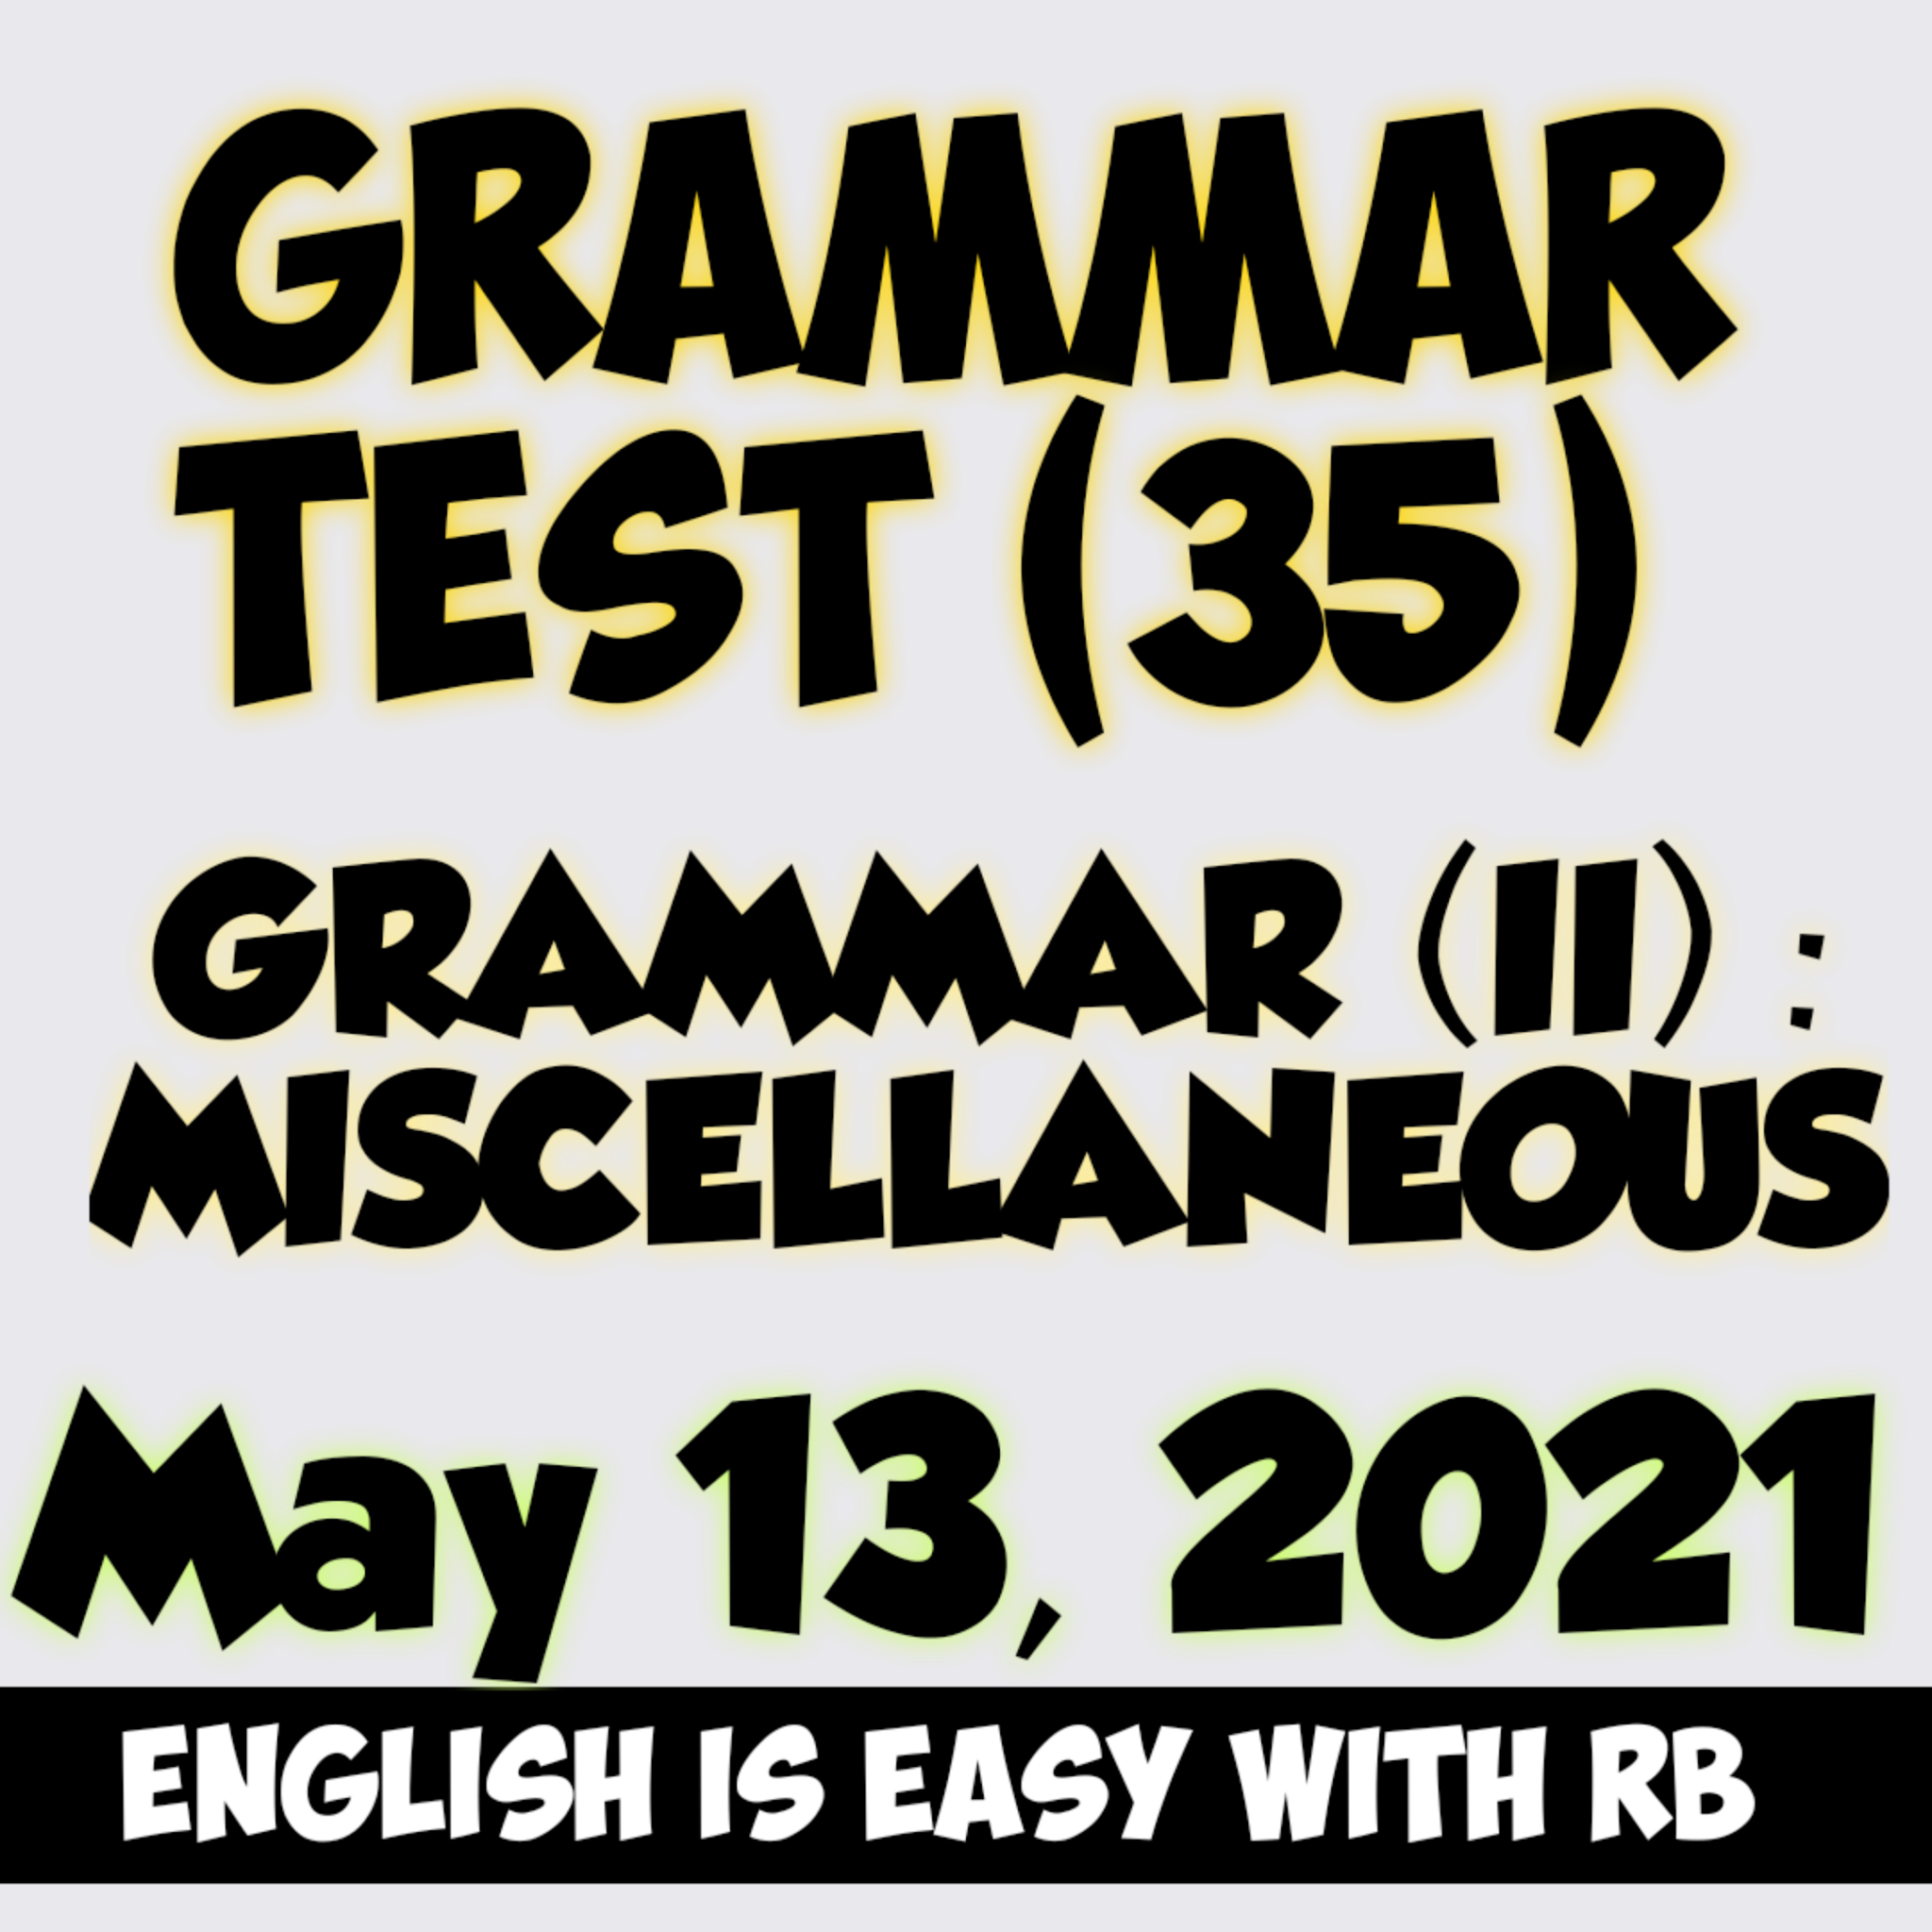 english-is-easy-with-rb-grammar-test-may-13-2021